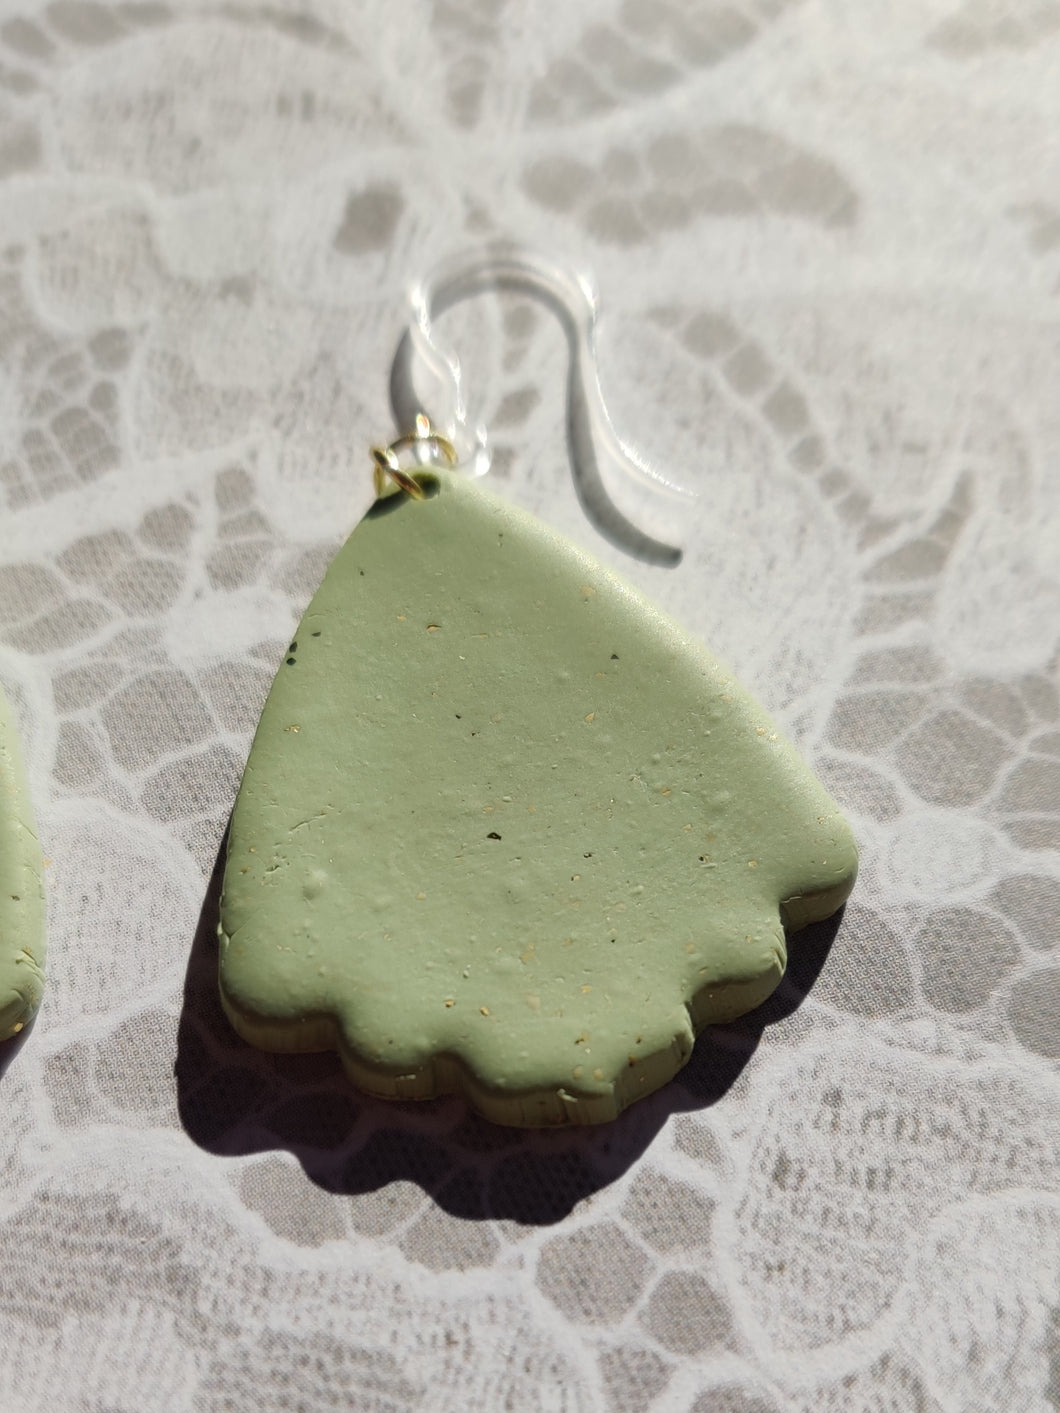 Shell Sage Green & Gold Speckled Earrings